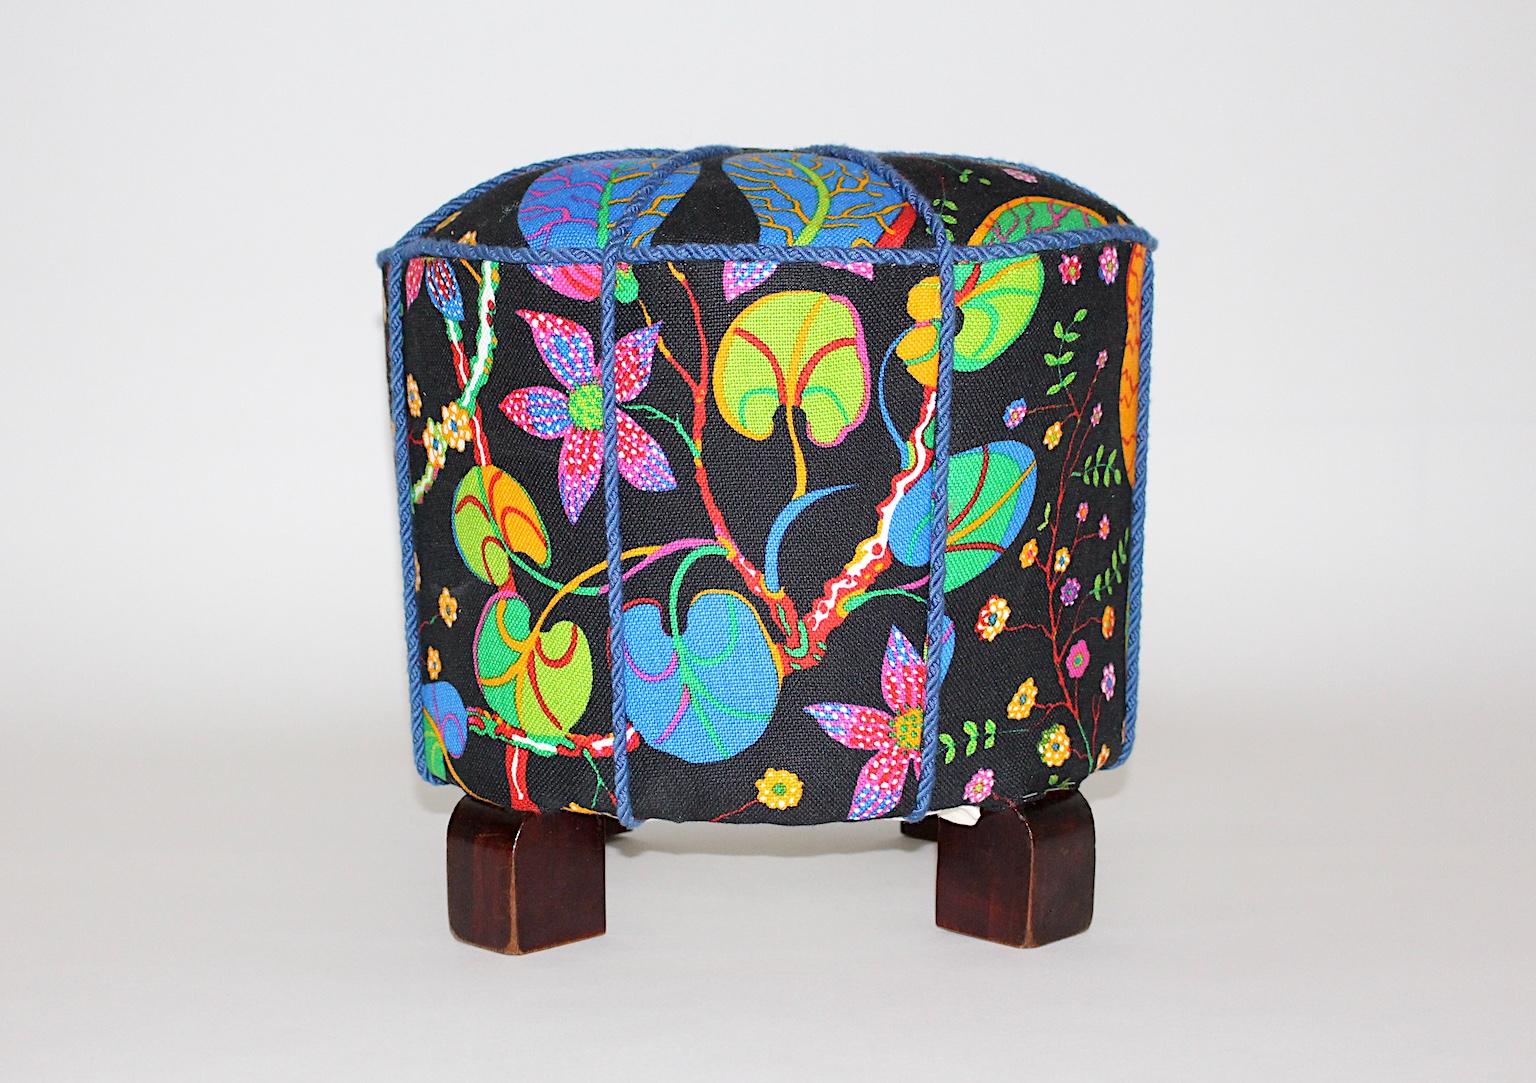 Art Deco vintage pouf or stool with beech wooden feet, which is reupholstered and covered with gorgeous multicolored textile fabric. The textile fabric was designed in the 1930s by Josef Frank and now manufactured by Svenskt Tenn. The fabric is